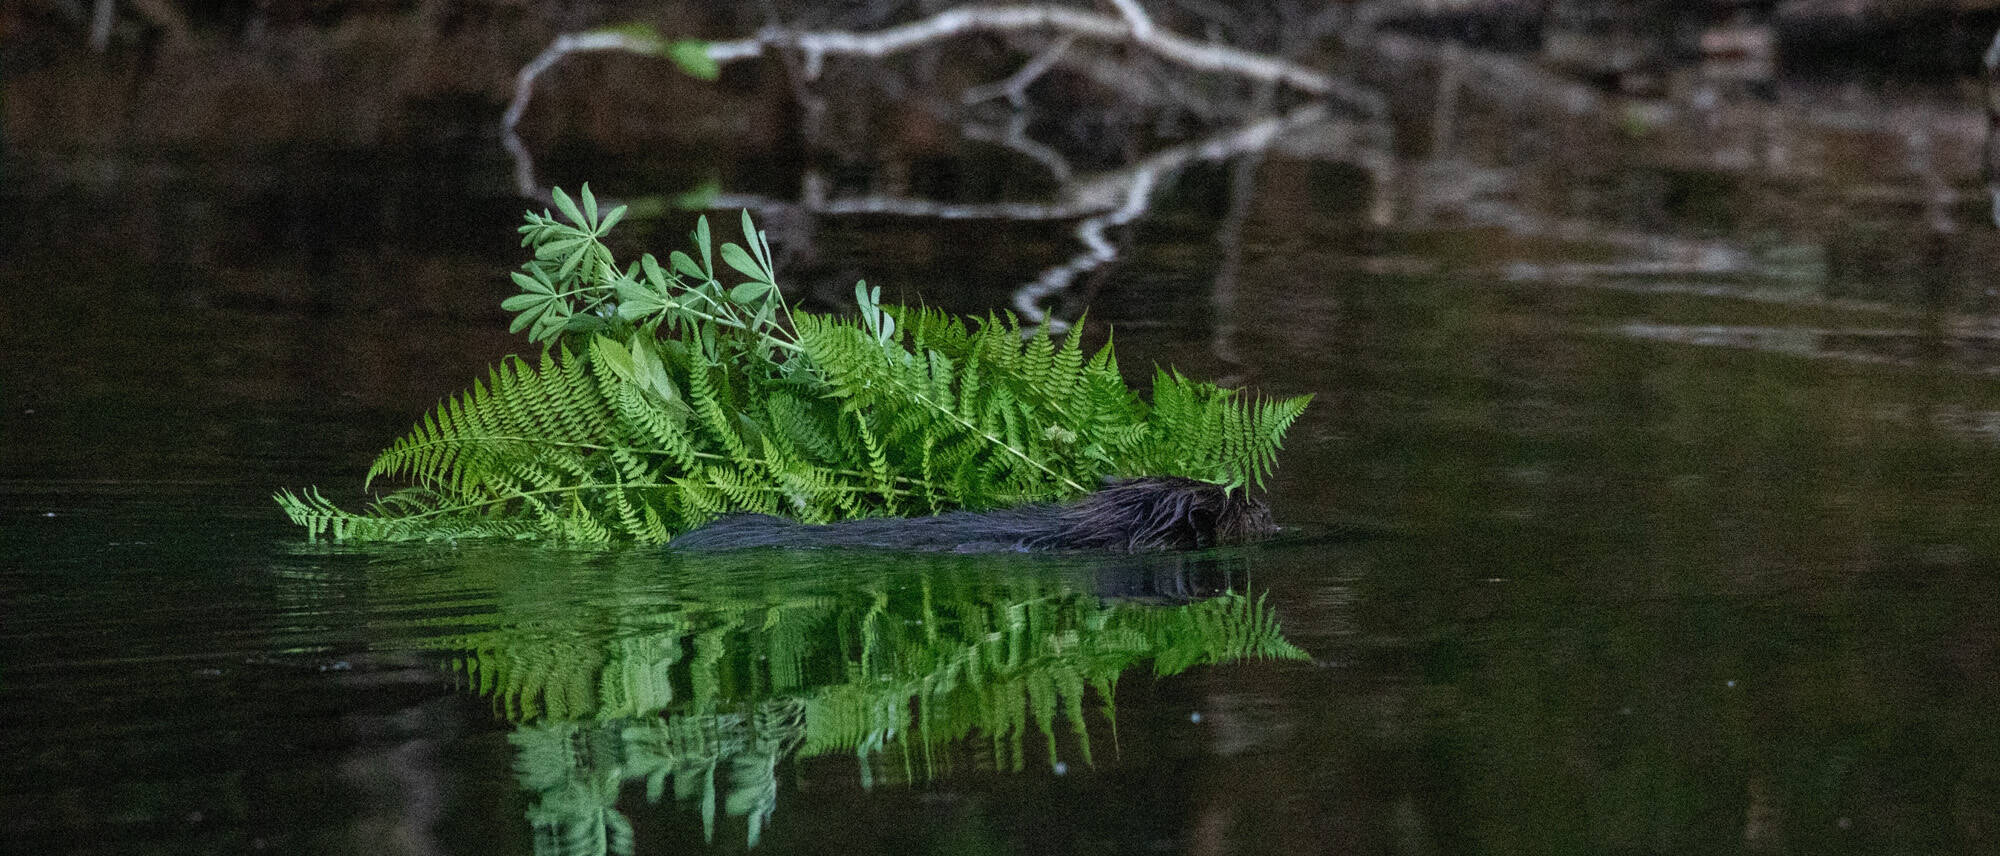 A beaver hauls a load of ferns and lupine. (Courtesy Photo / Jos Bakker)